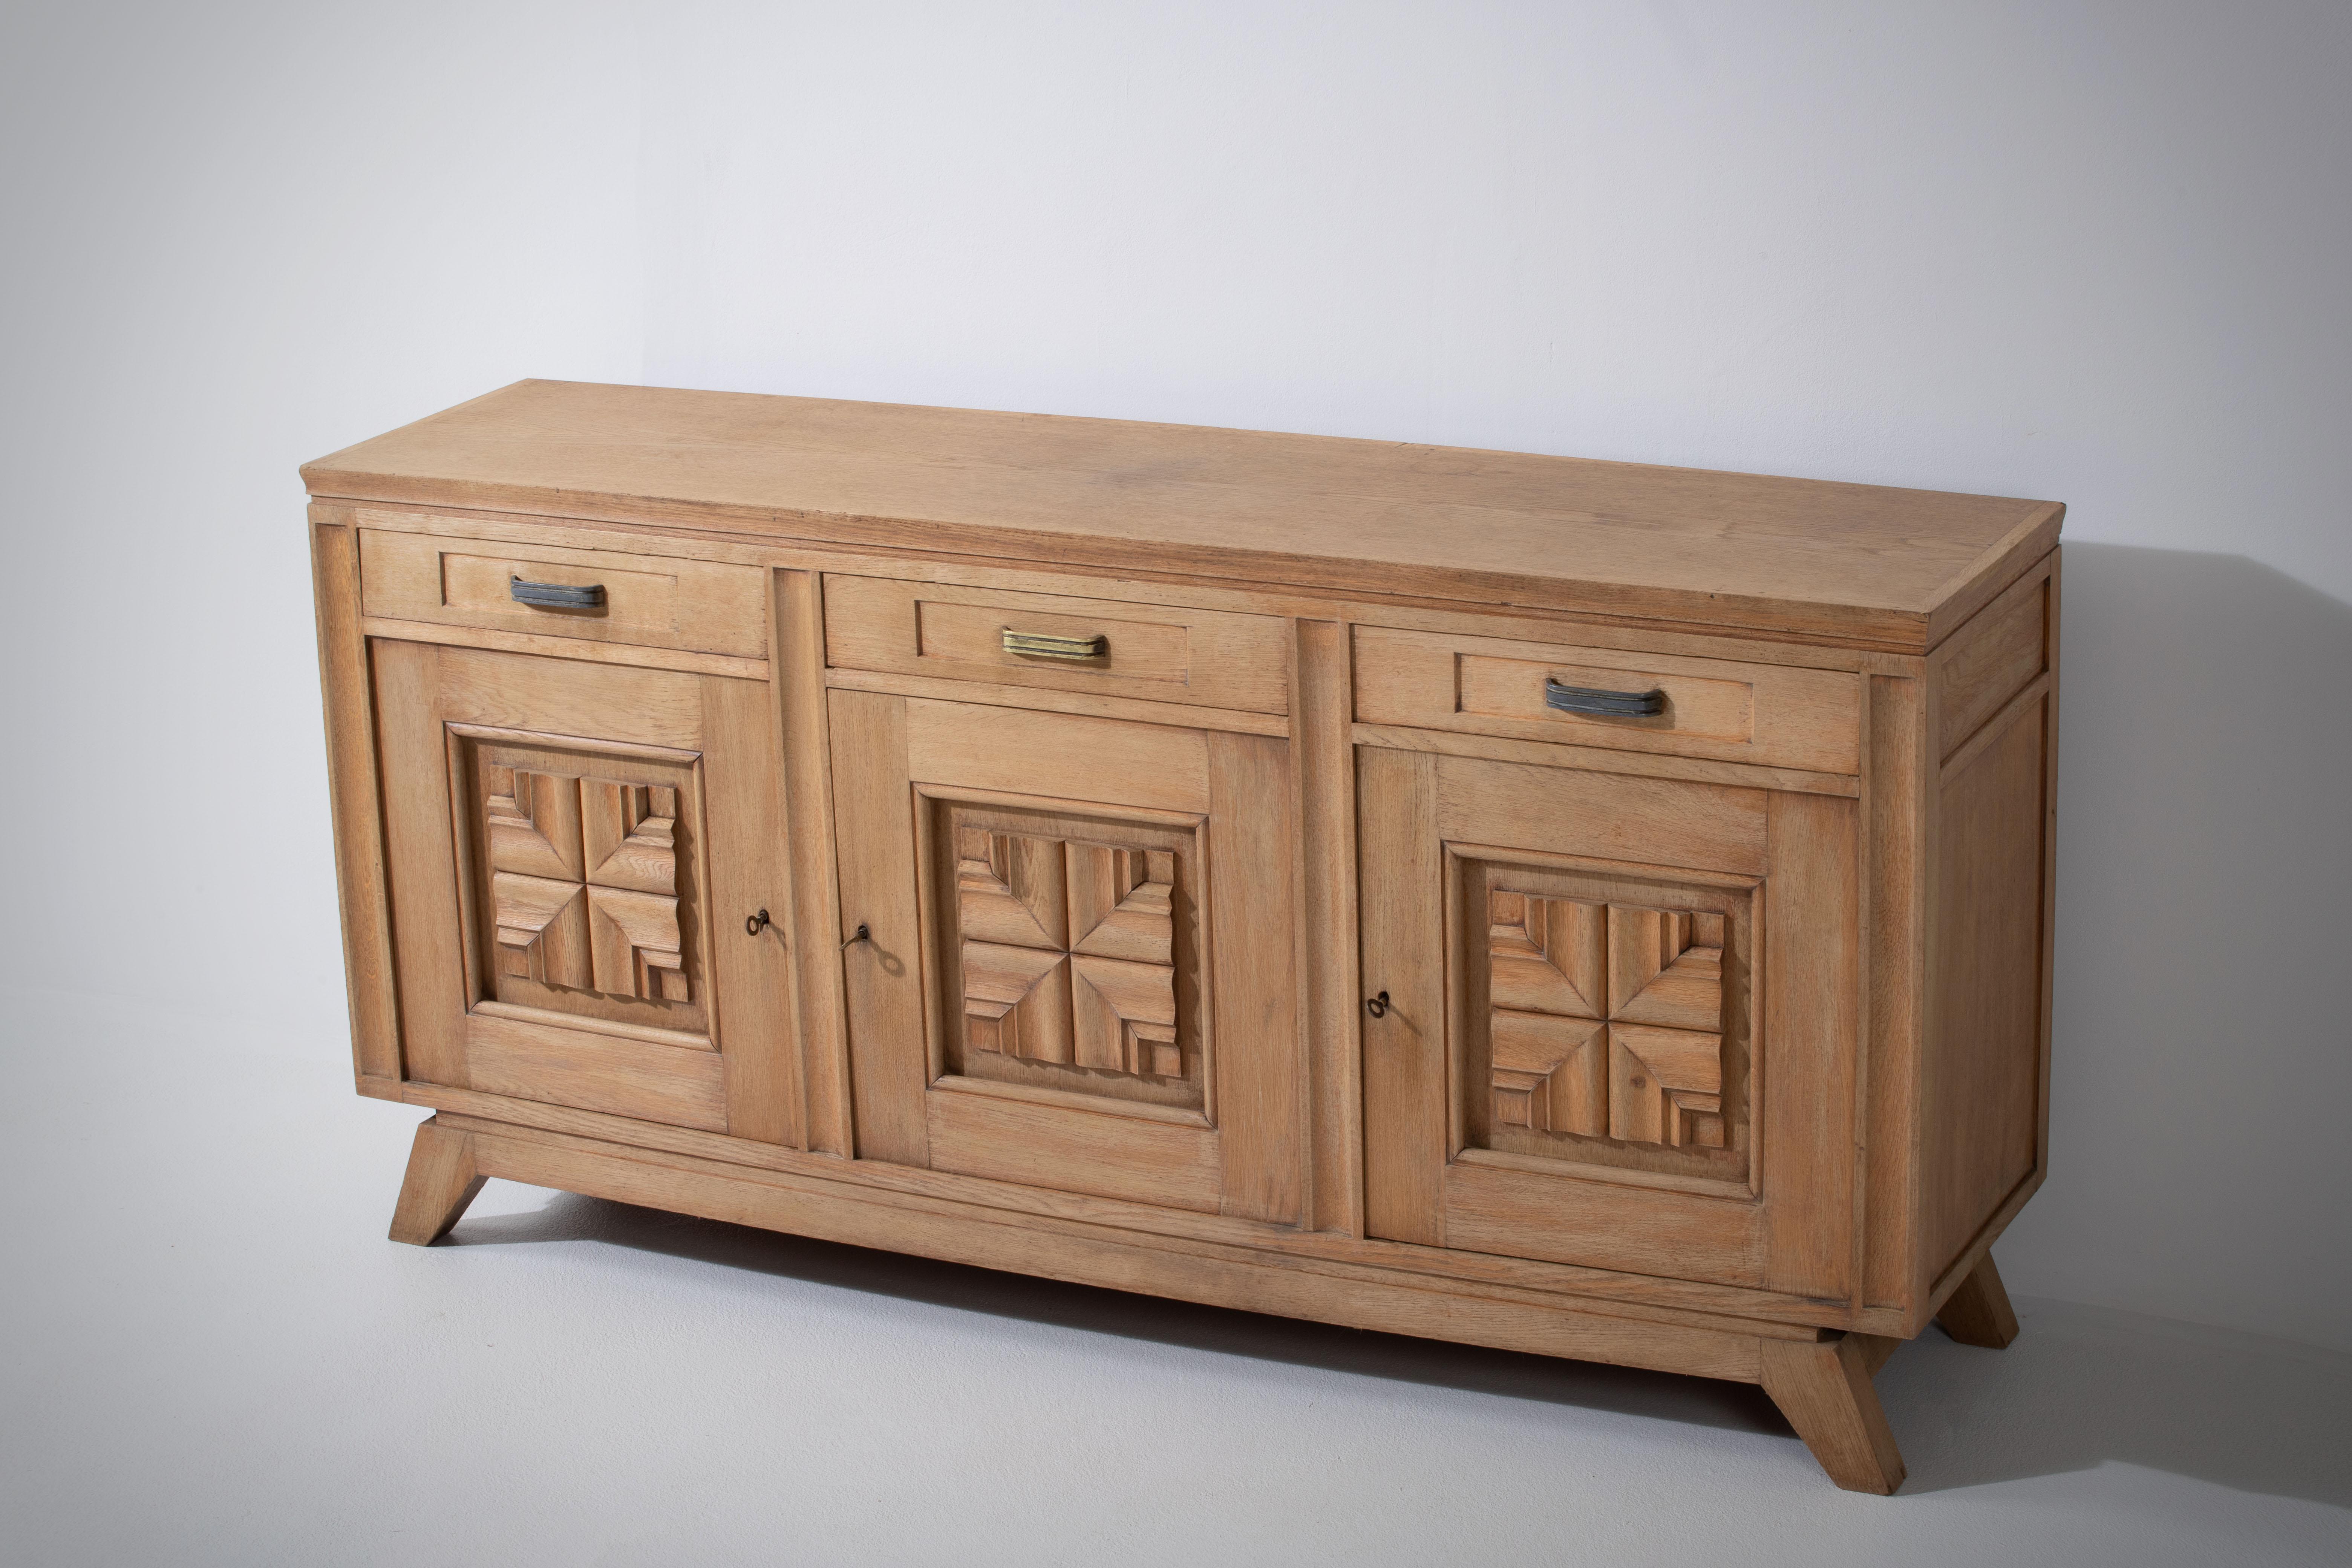 Bleached Solid Oak Cabinet with Graphic Details, France, 1940s For Sale 2